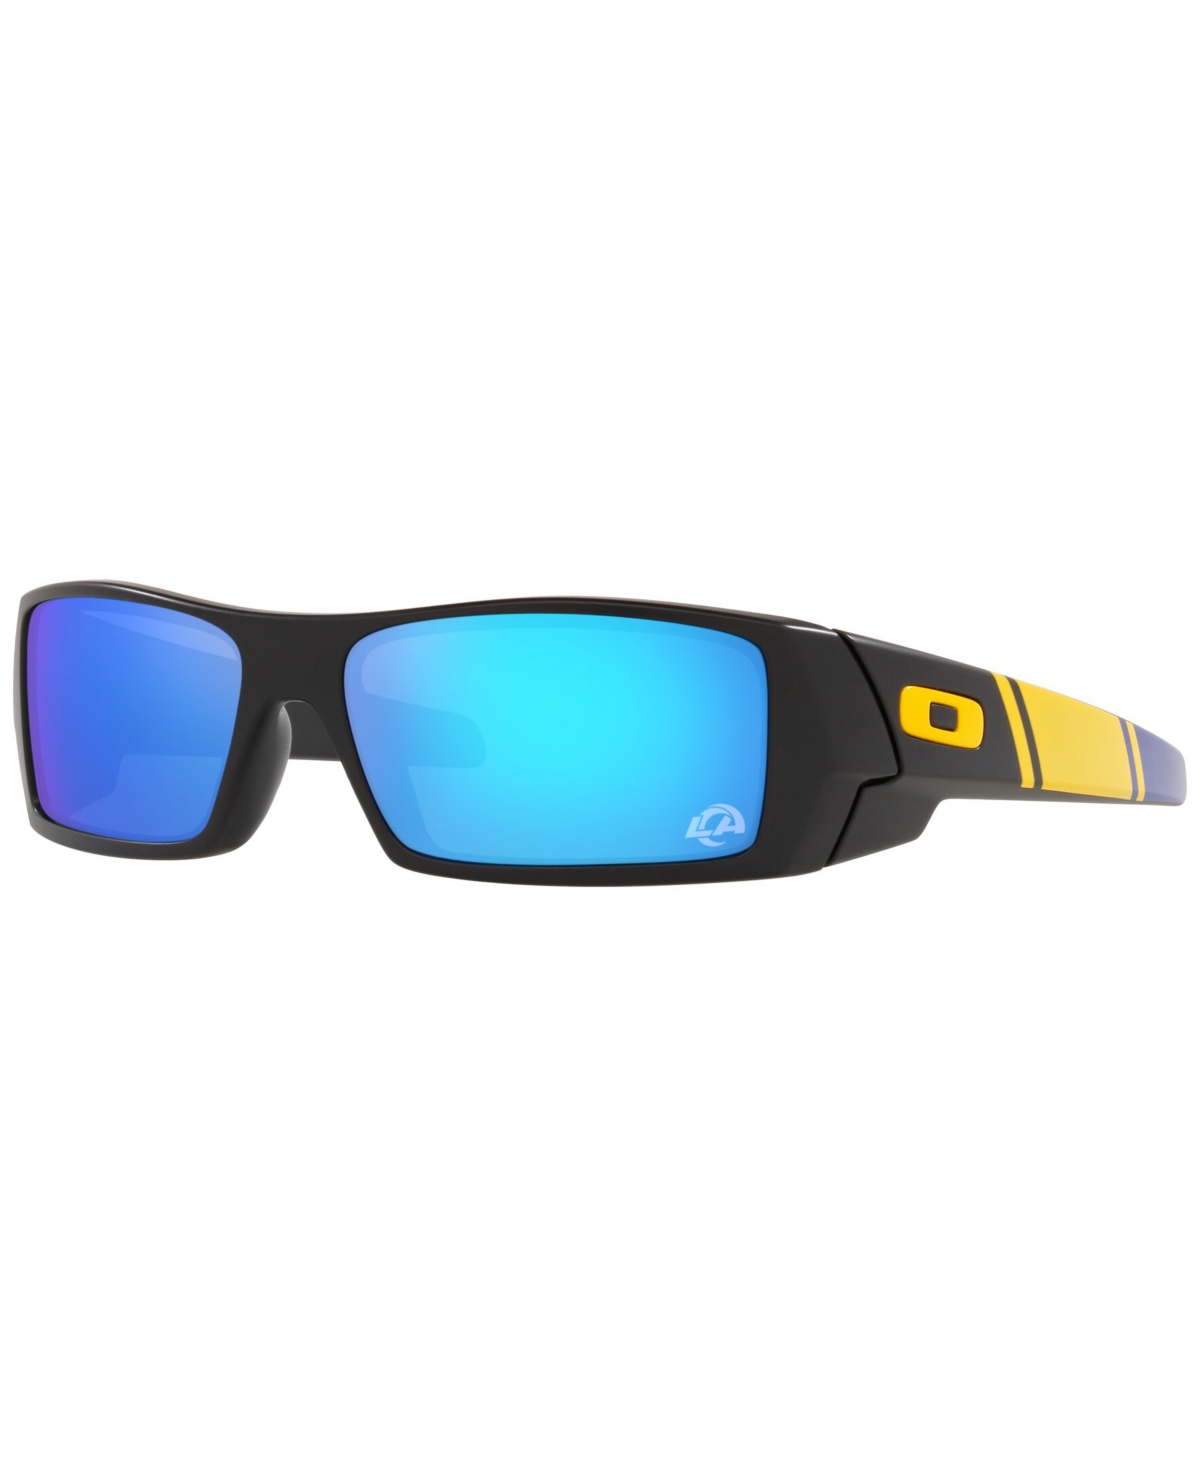 OAKLEY NFL COLLECTION MEN'S SUNGLASSES, LOS ANGELES RAMS OO9014 60 GASCAN